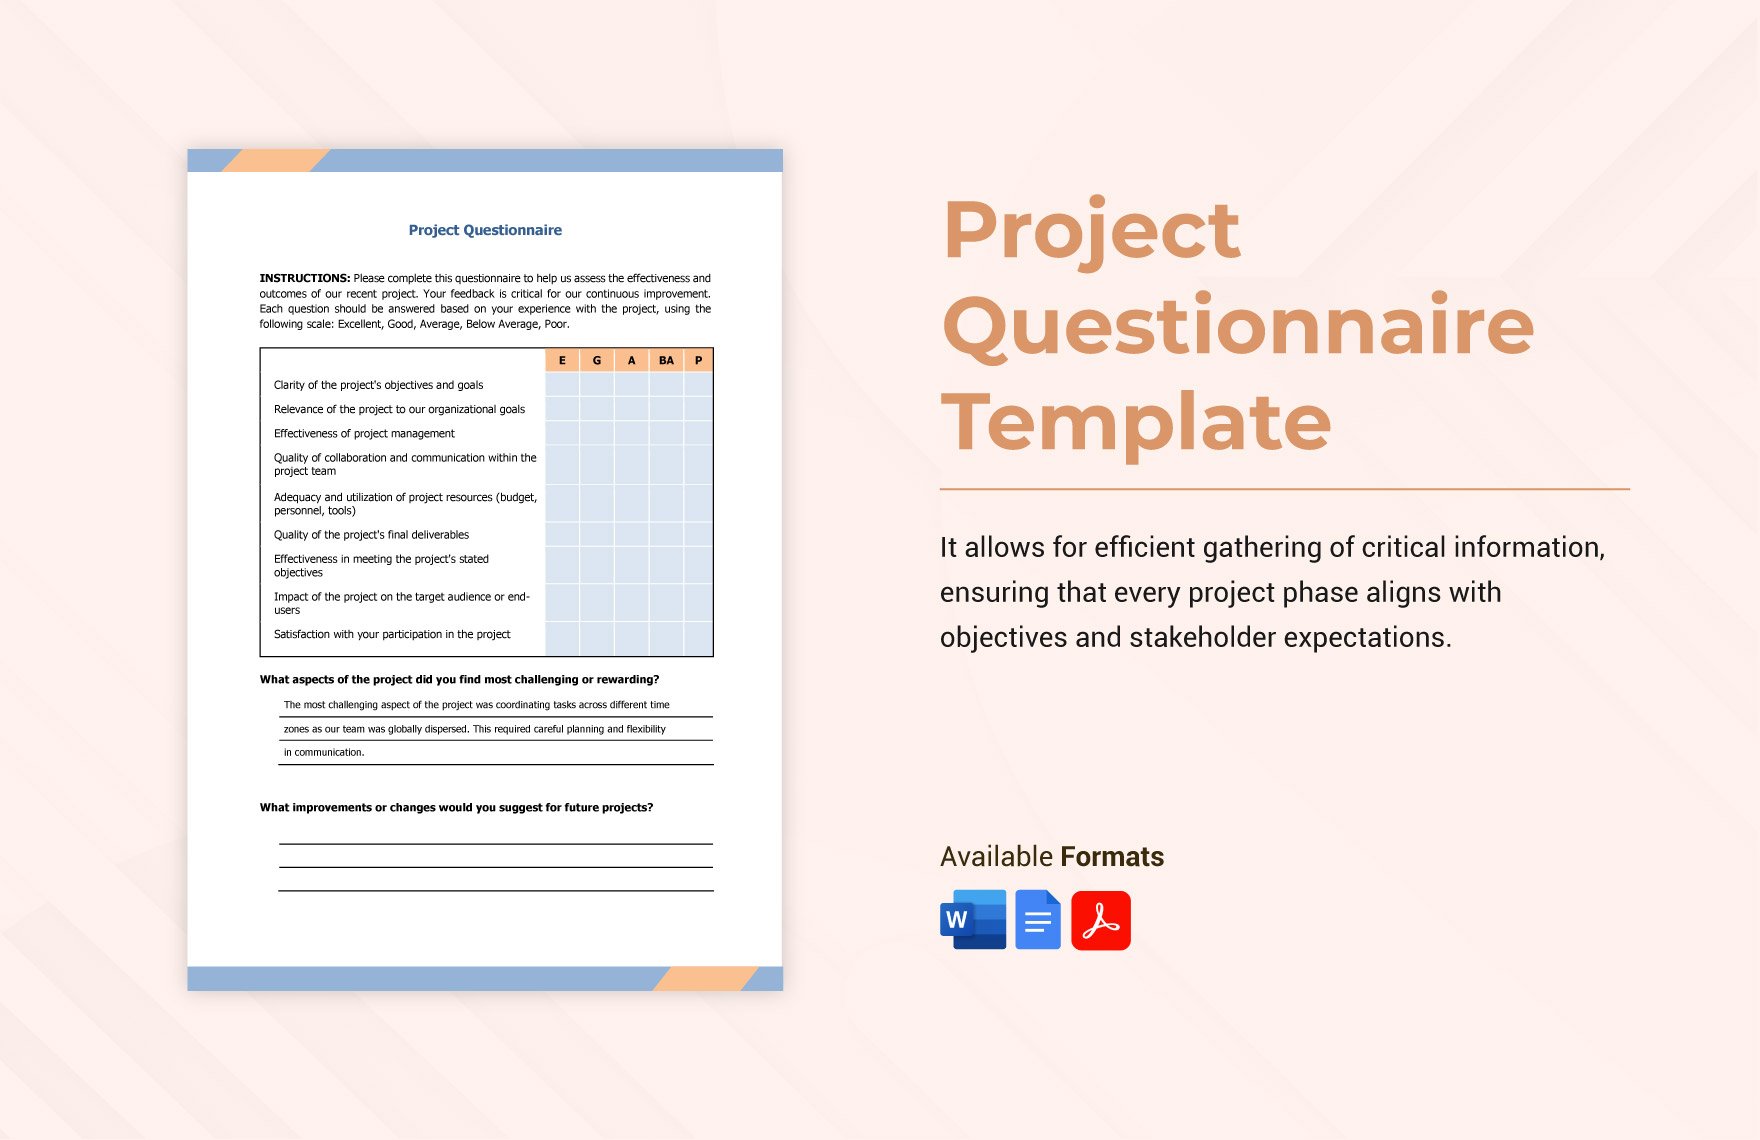 Free Project Questionnaire Template in Word, Google Docs, PDF